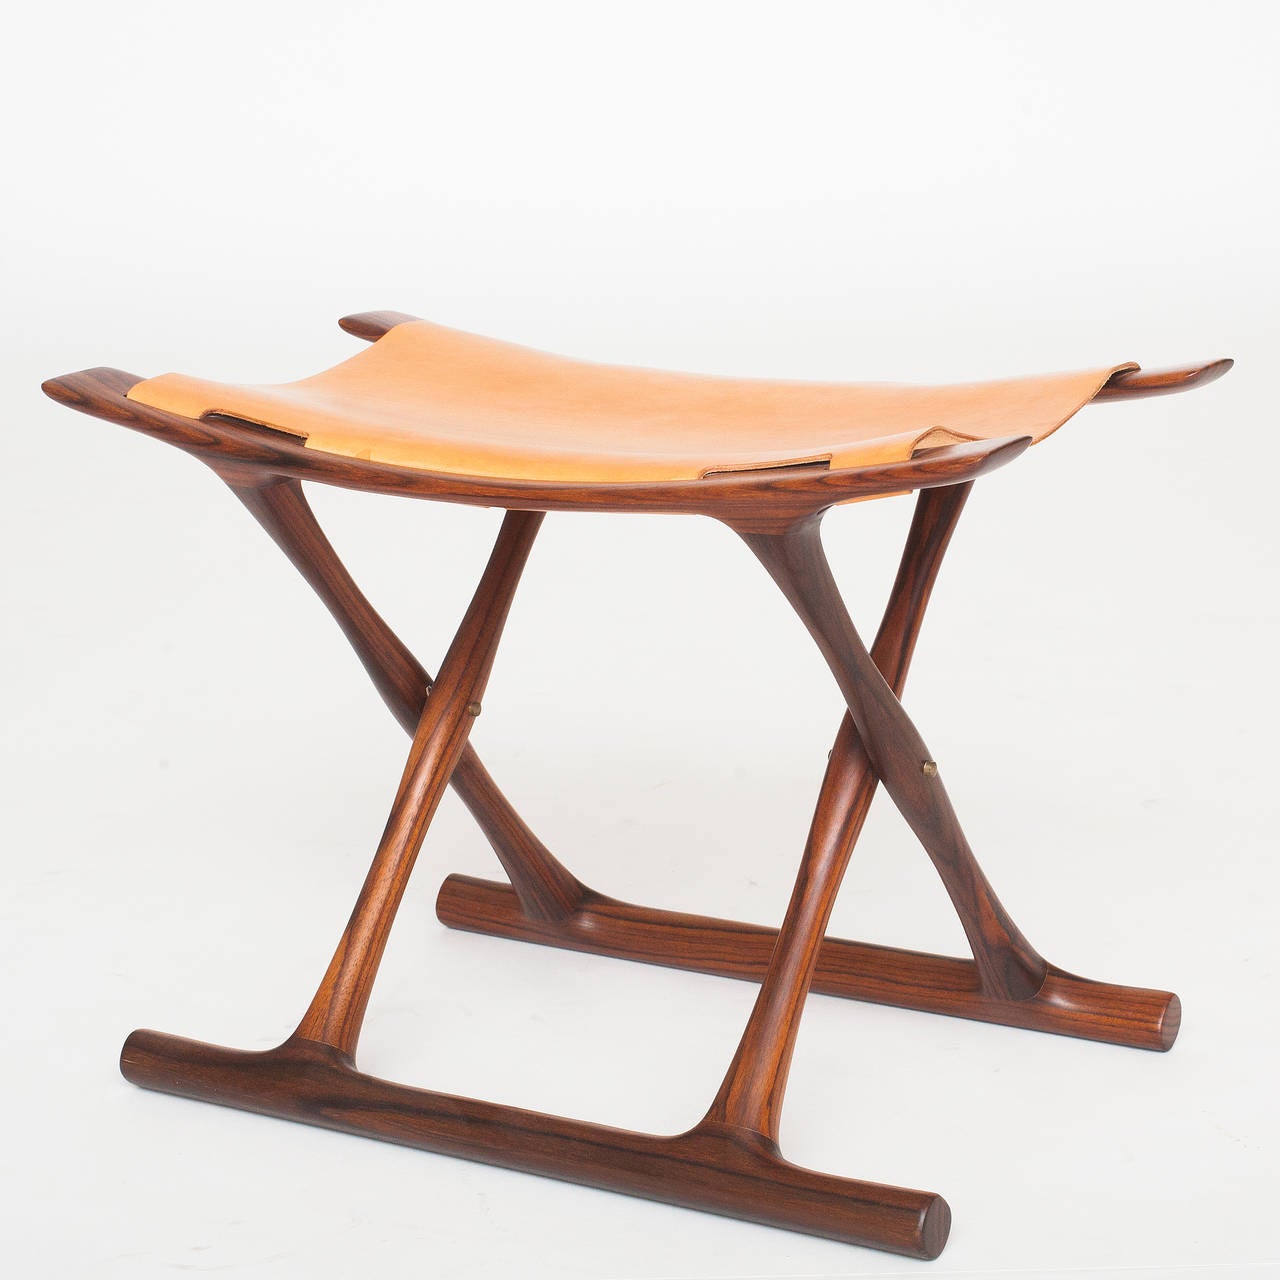 Egyptian stool in Sonokeling rosewood with original cognac leather.

Period: 1930-1939